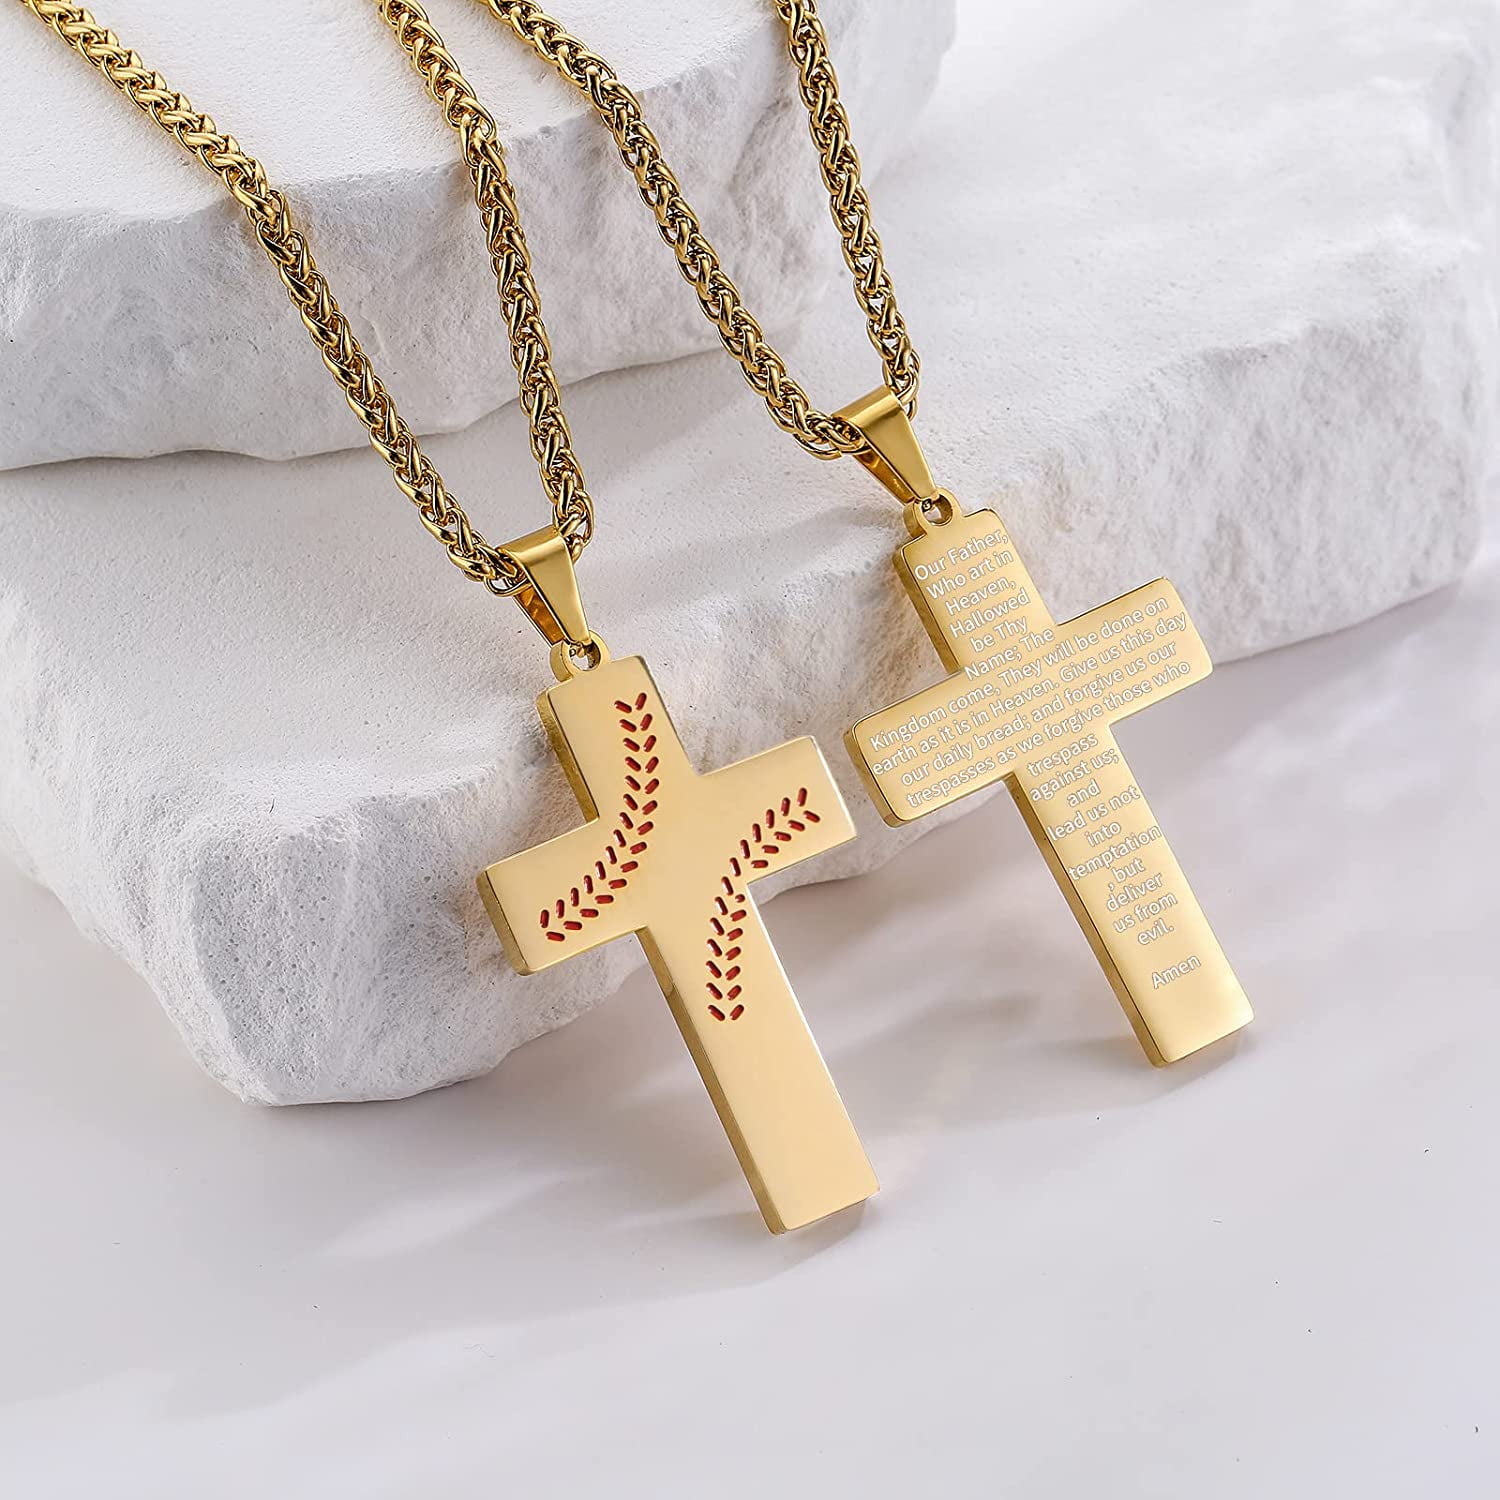 Boys Mens Baseball Cross Pendant Necklace 18K Gold Plated Bible Verse  Stainless Steel Necklace Jewelry (A-Black) | Amazon.com